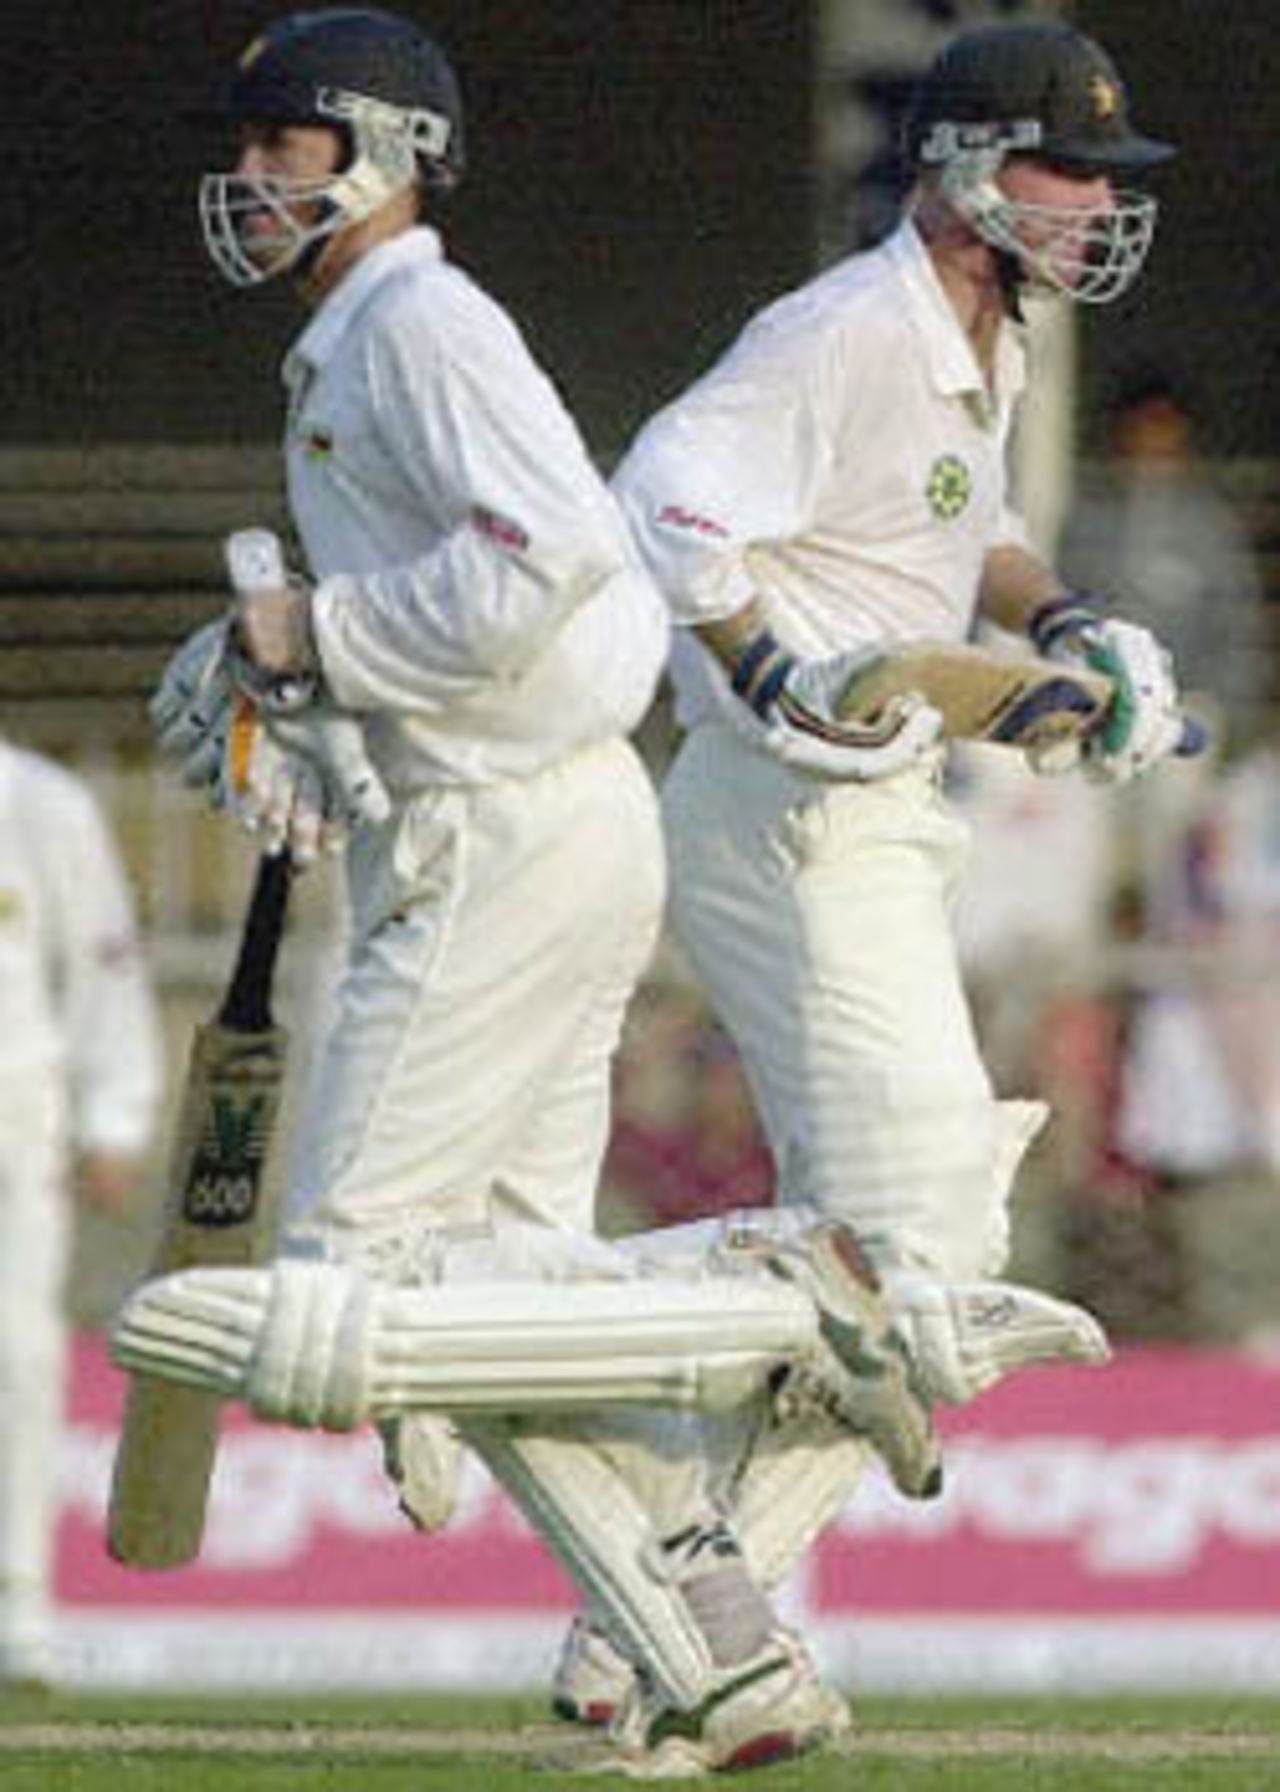 Andy Flower and Alistair Campbell cross for a run during their partnership, Zimbabwe in India, 2000/01, 2nd Test, India v Zimbabwe, Vidarbha C.A. Ground, Nagpur, 25-29 November 2000 (Day 4).